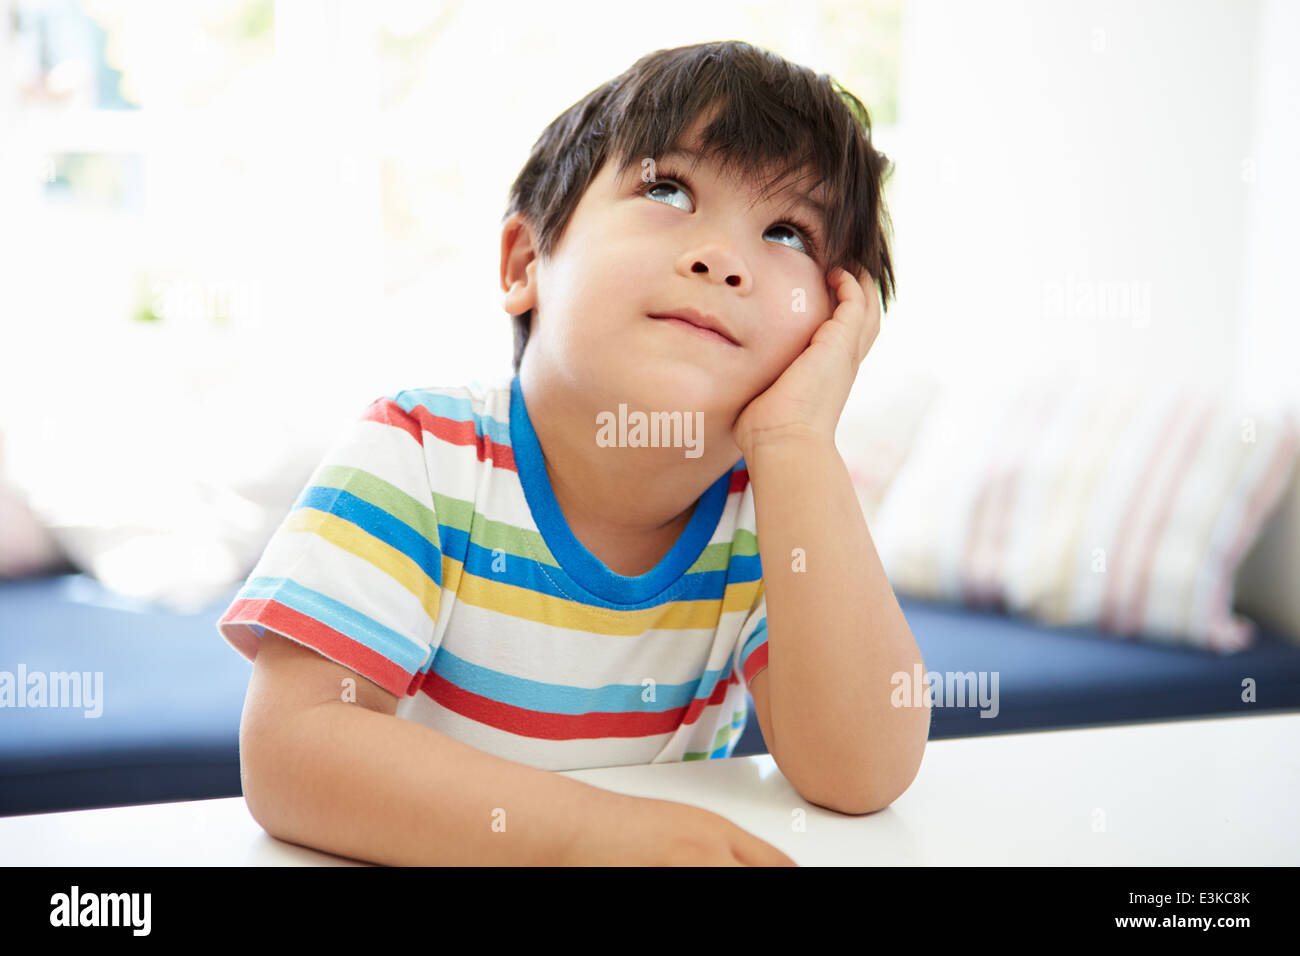 Asian Boy With Head In Hands Thinking Stock Photo